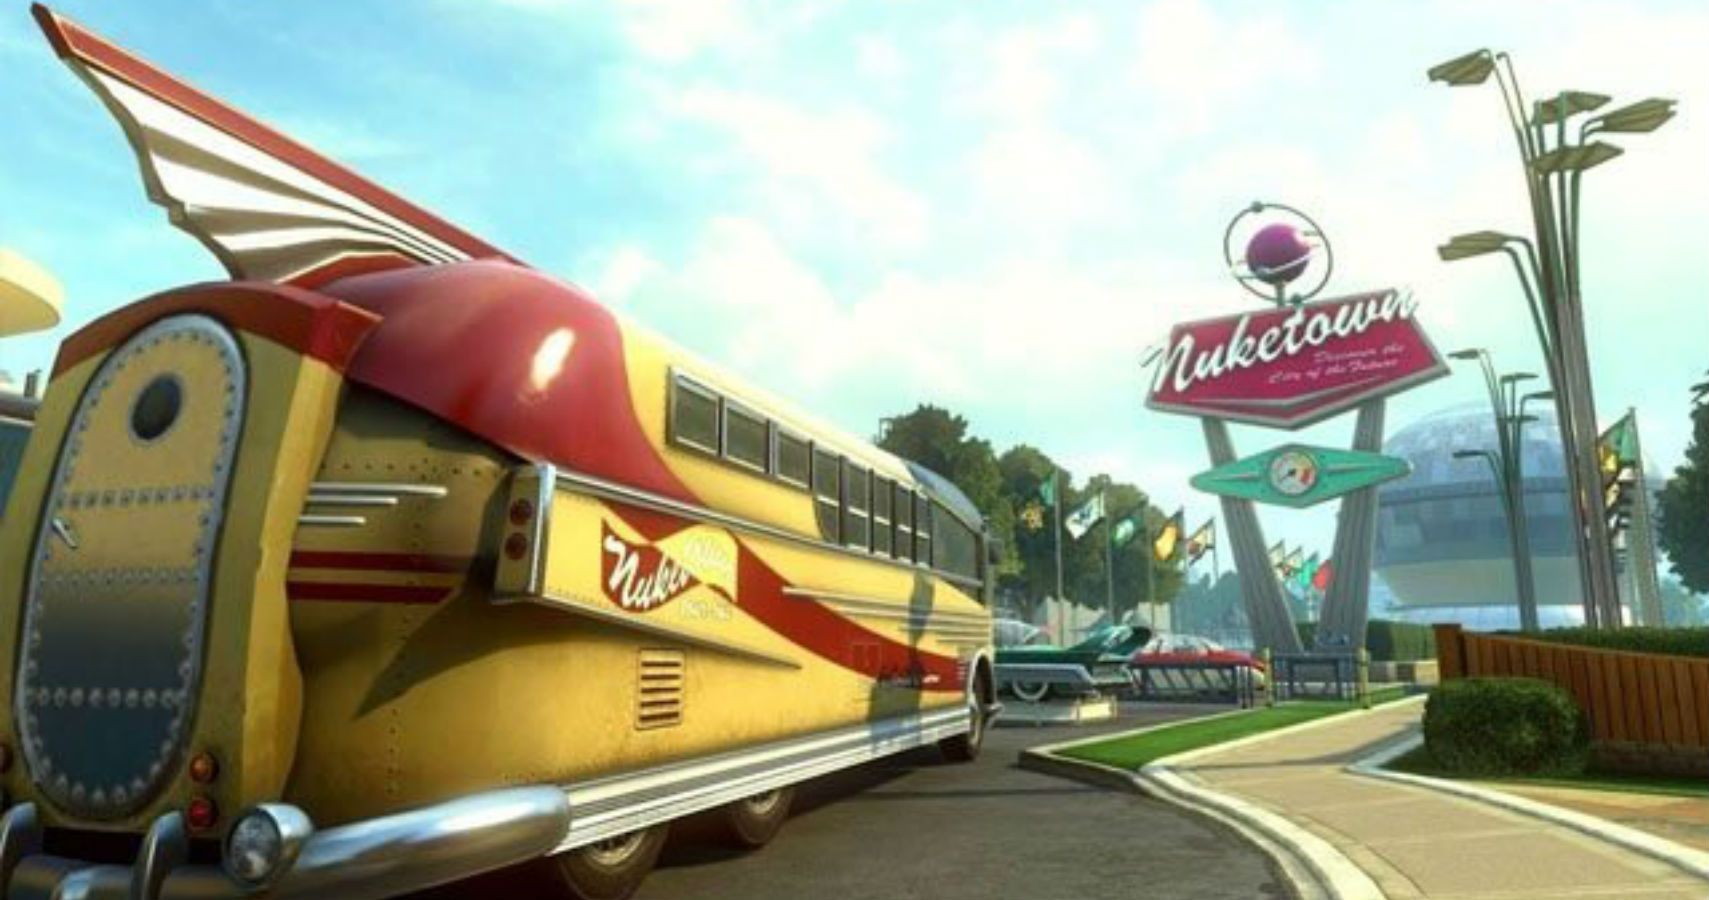 Call Of Duty: Black Ops Cold War Will Feature Nuketown, New Zombies Modes, More At Launch